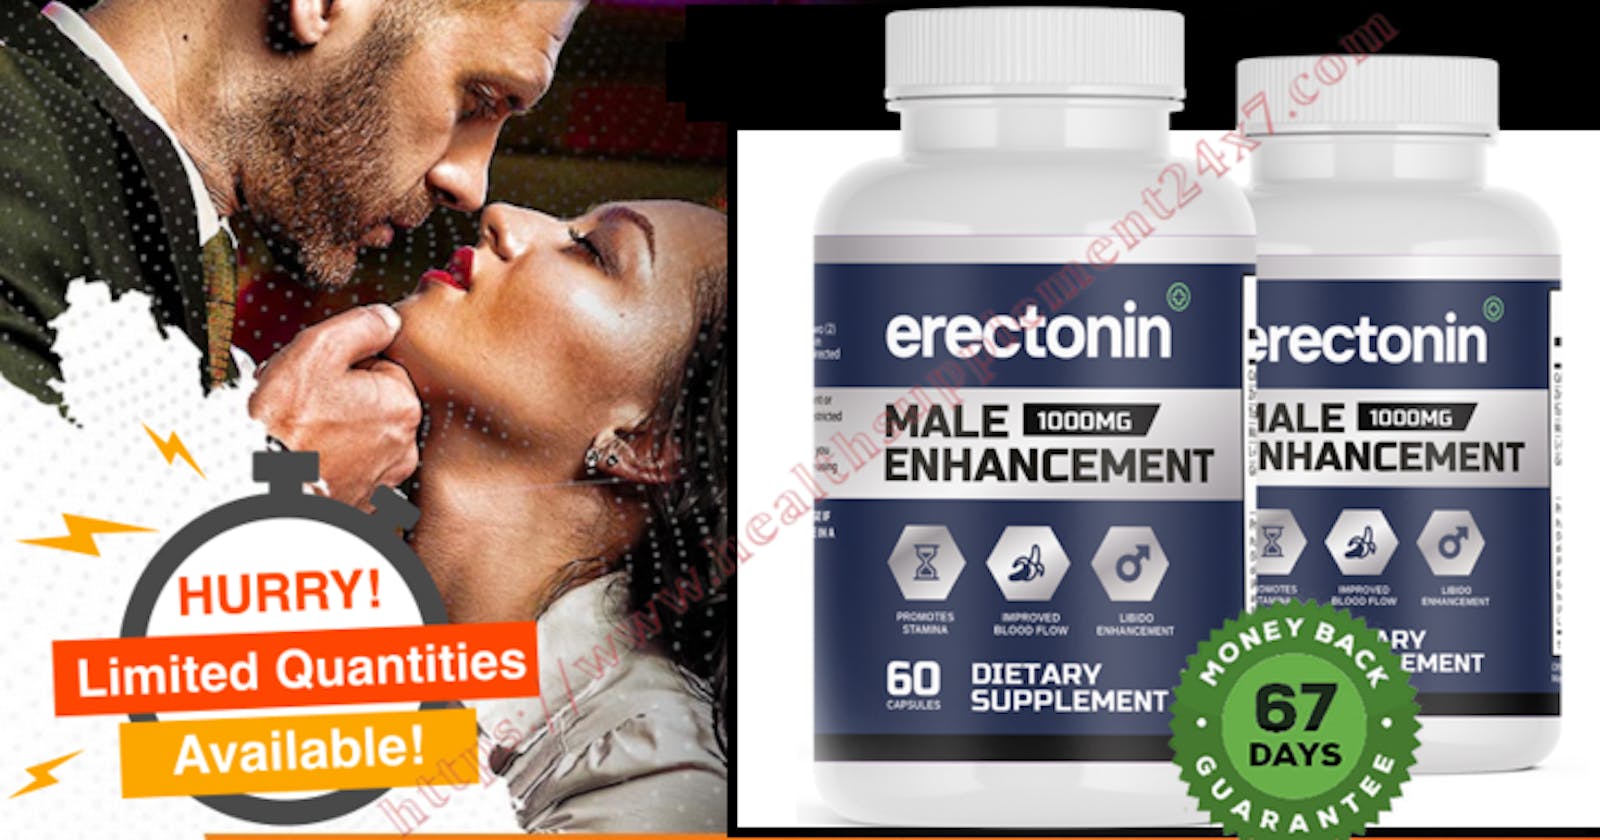 Erectonin Male Enhancement (Clinically Tested) Increase And Boost Healthy Blood Flow & Arousal With a Bigger Appetite(REAL OR HOAX)